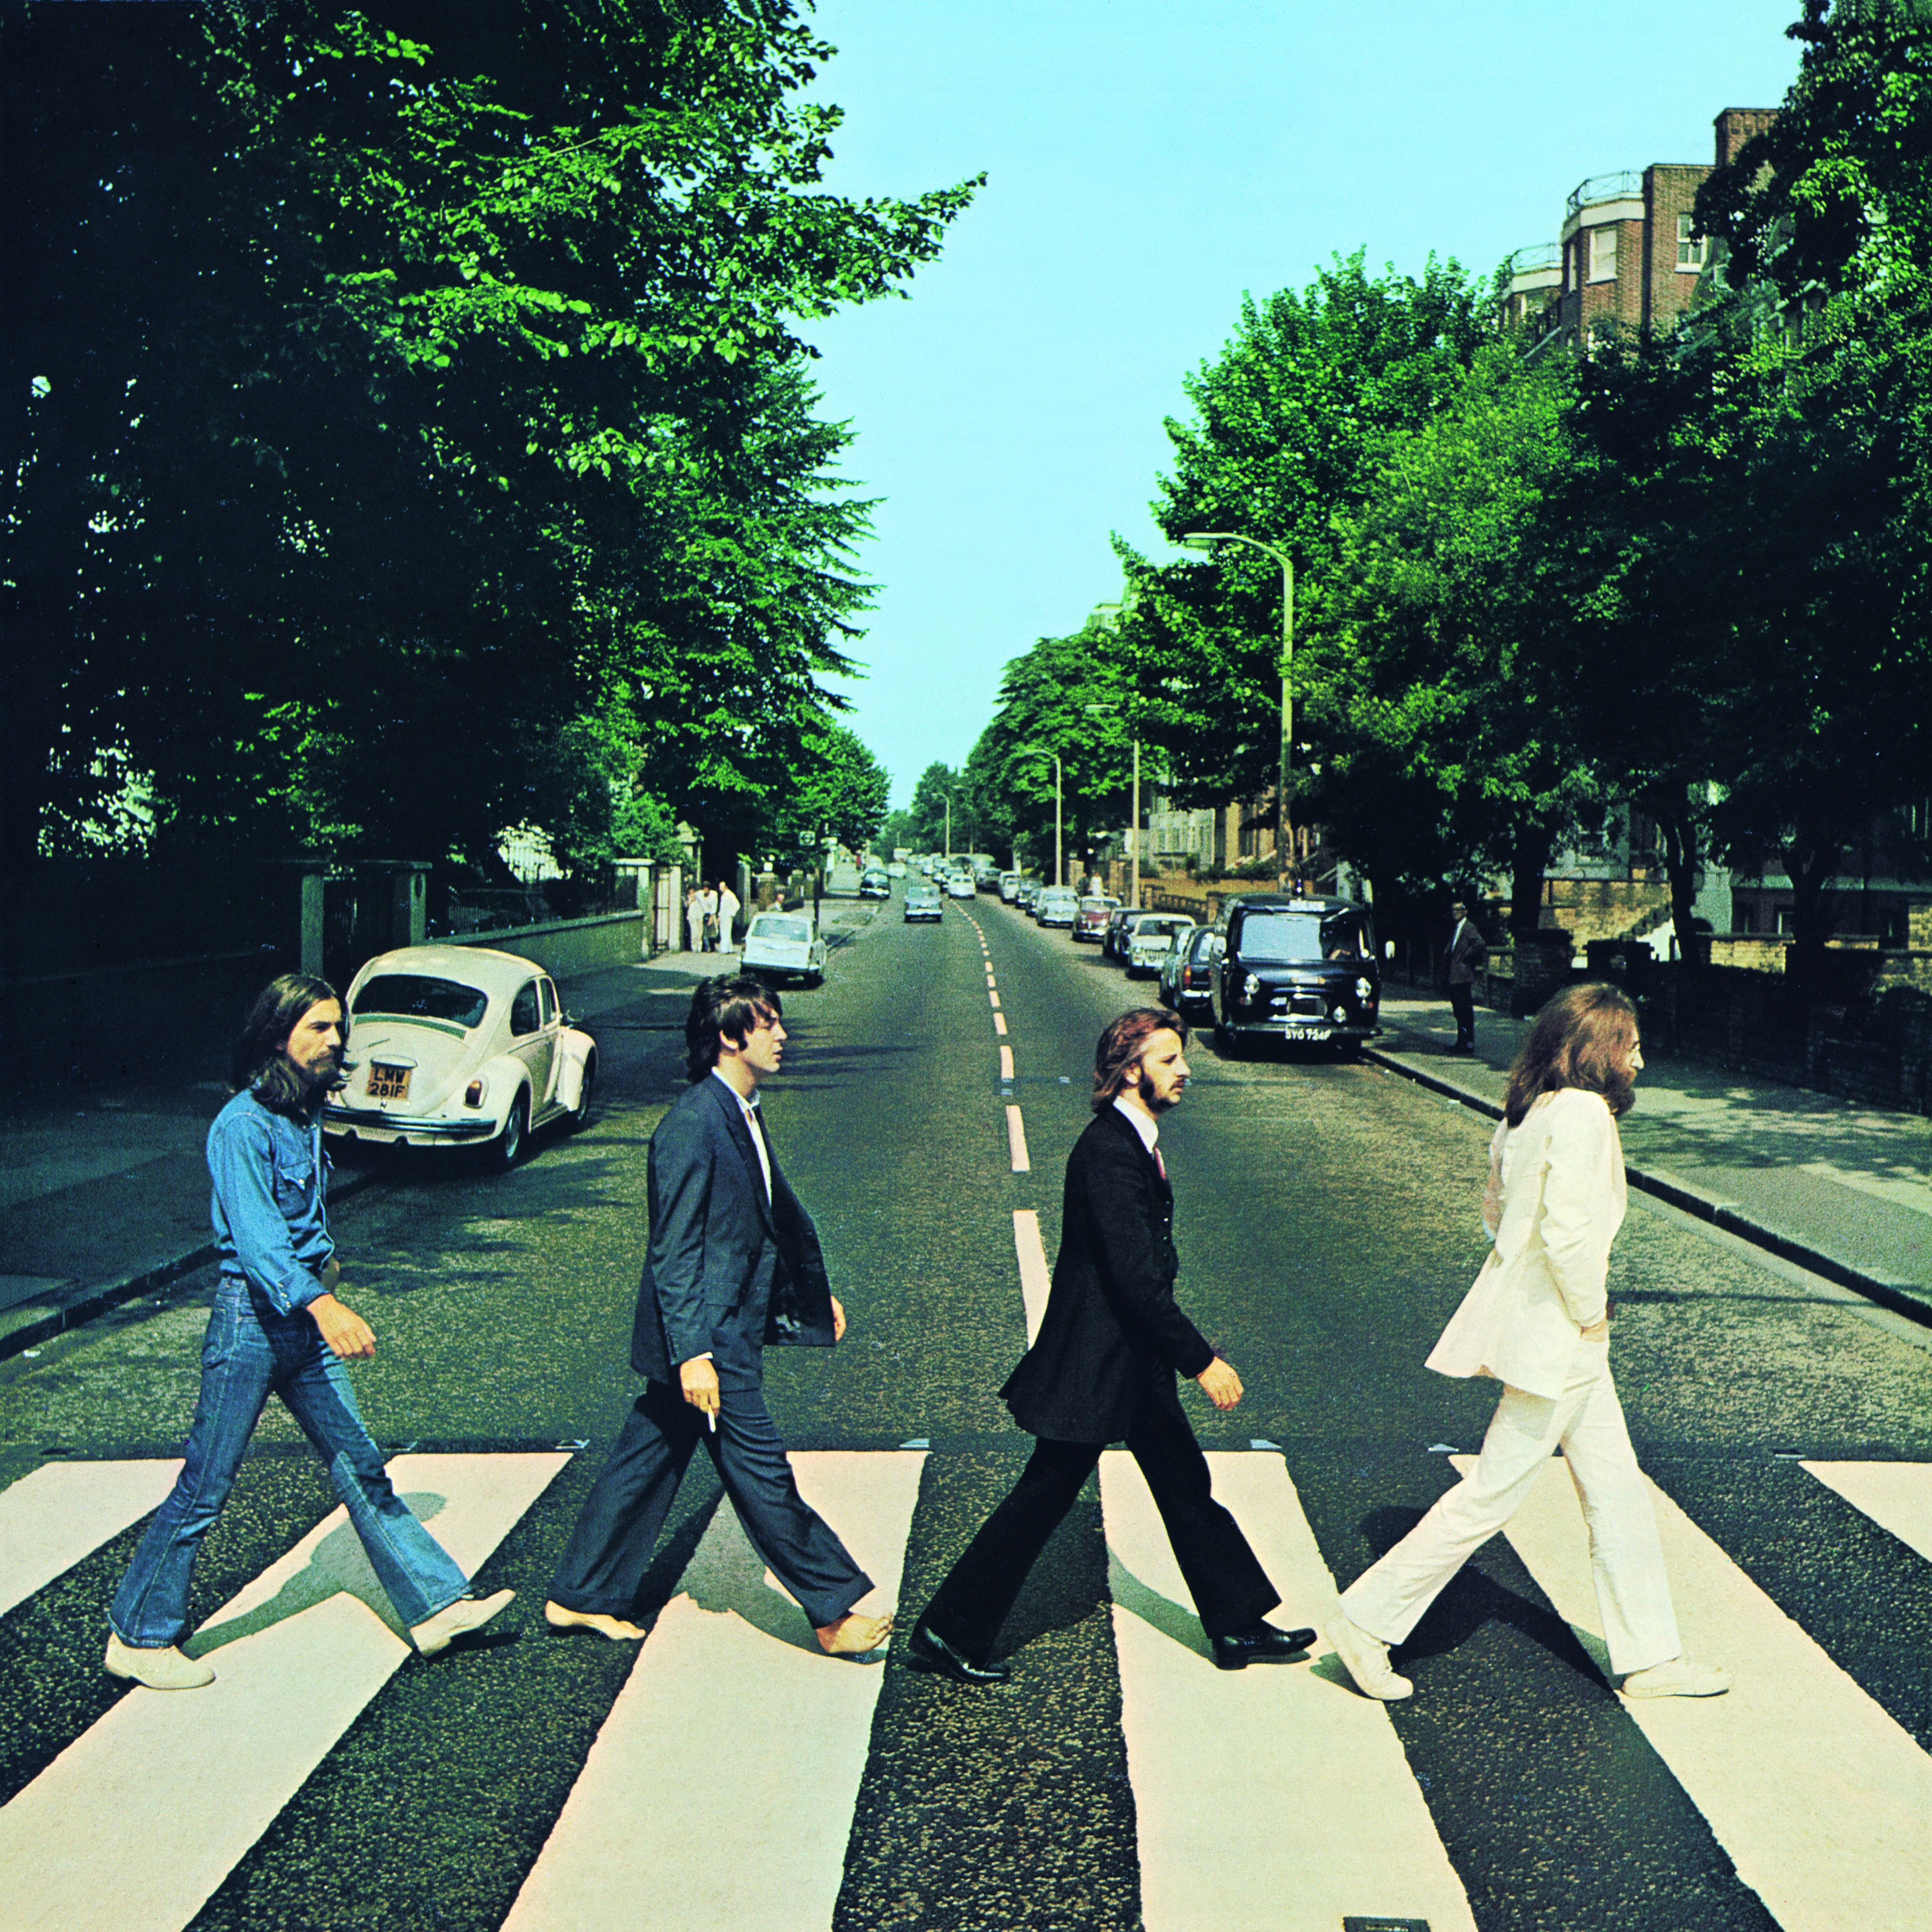 The album cover for The Beatle's "Abbey Road"